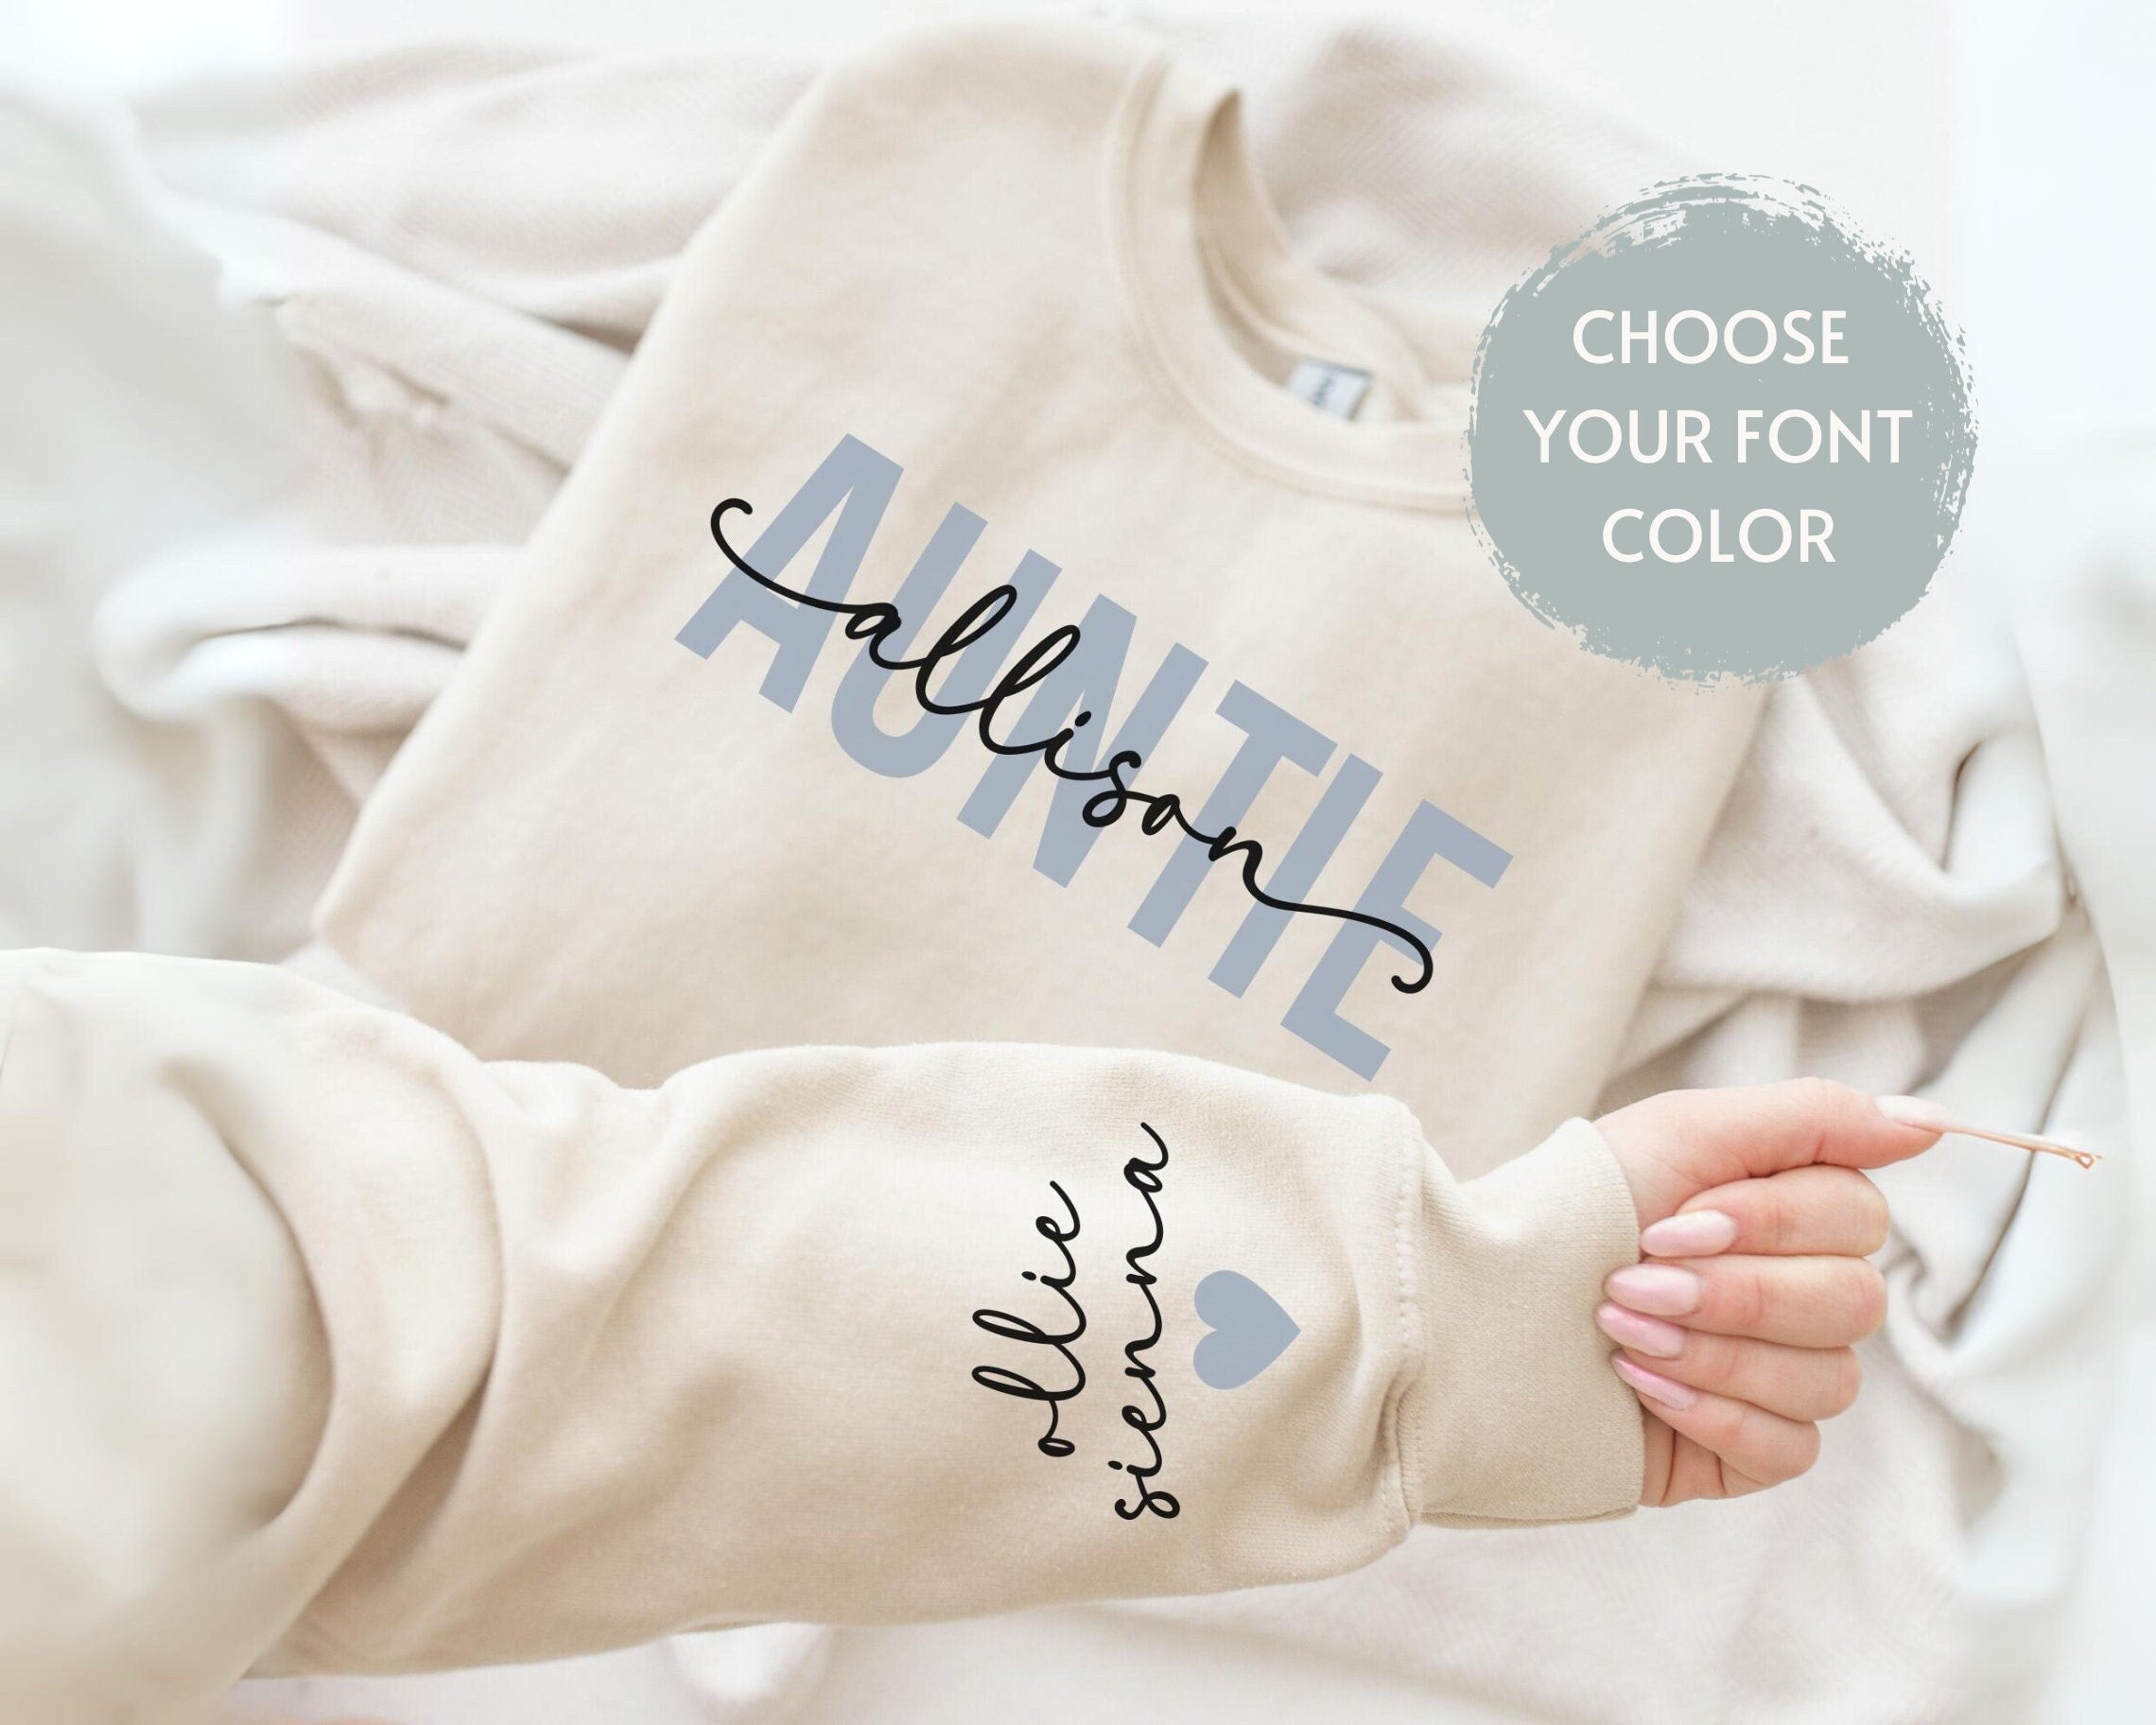 Auntie's Personalized Sweatshirt - Perfect for Mother's Day and Birthdays